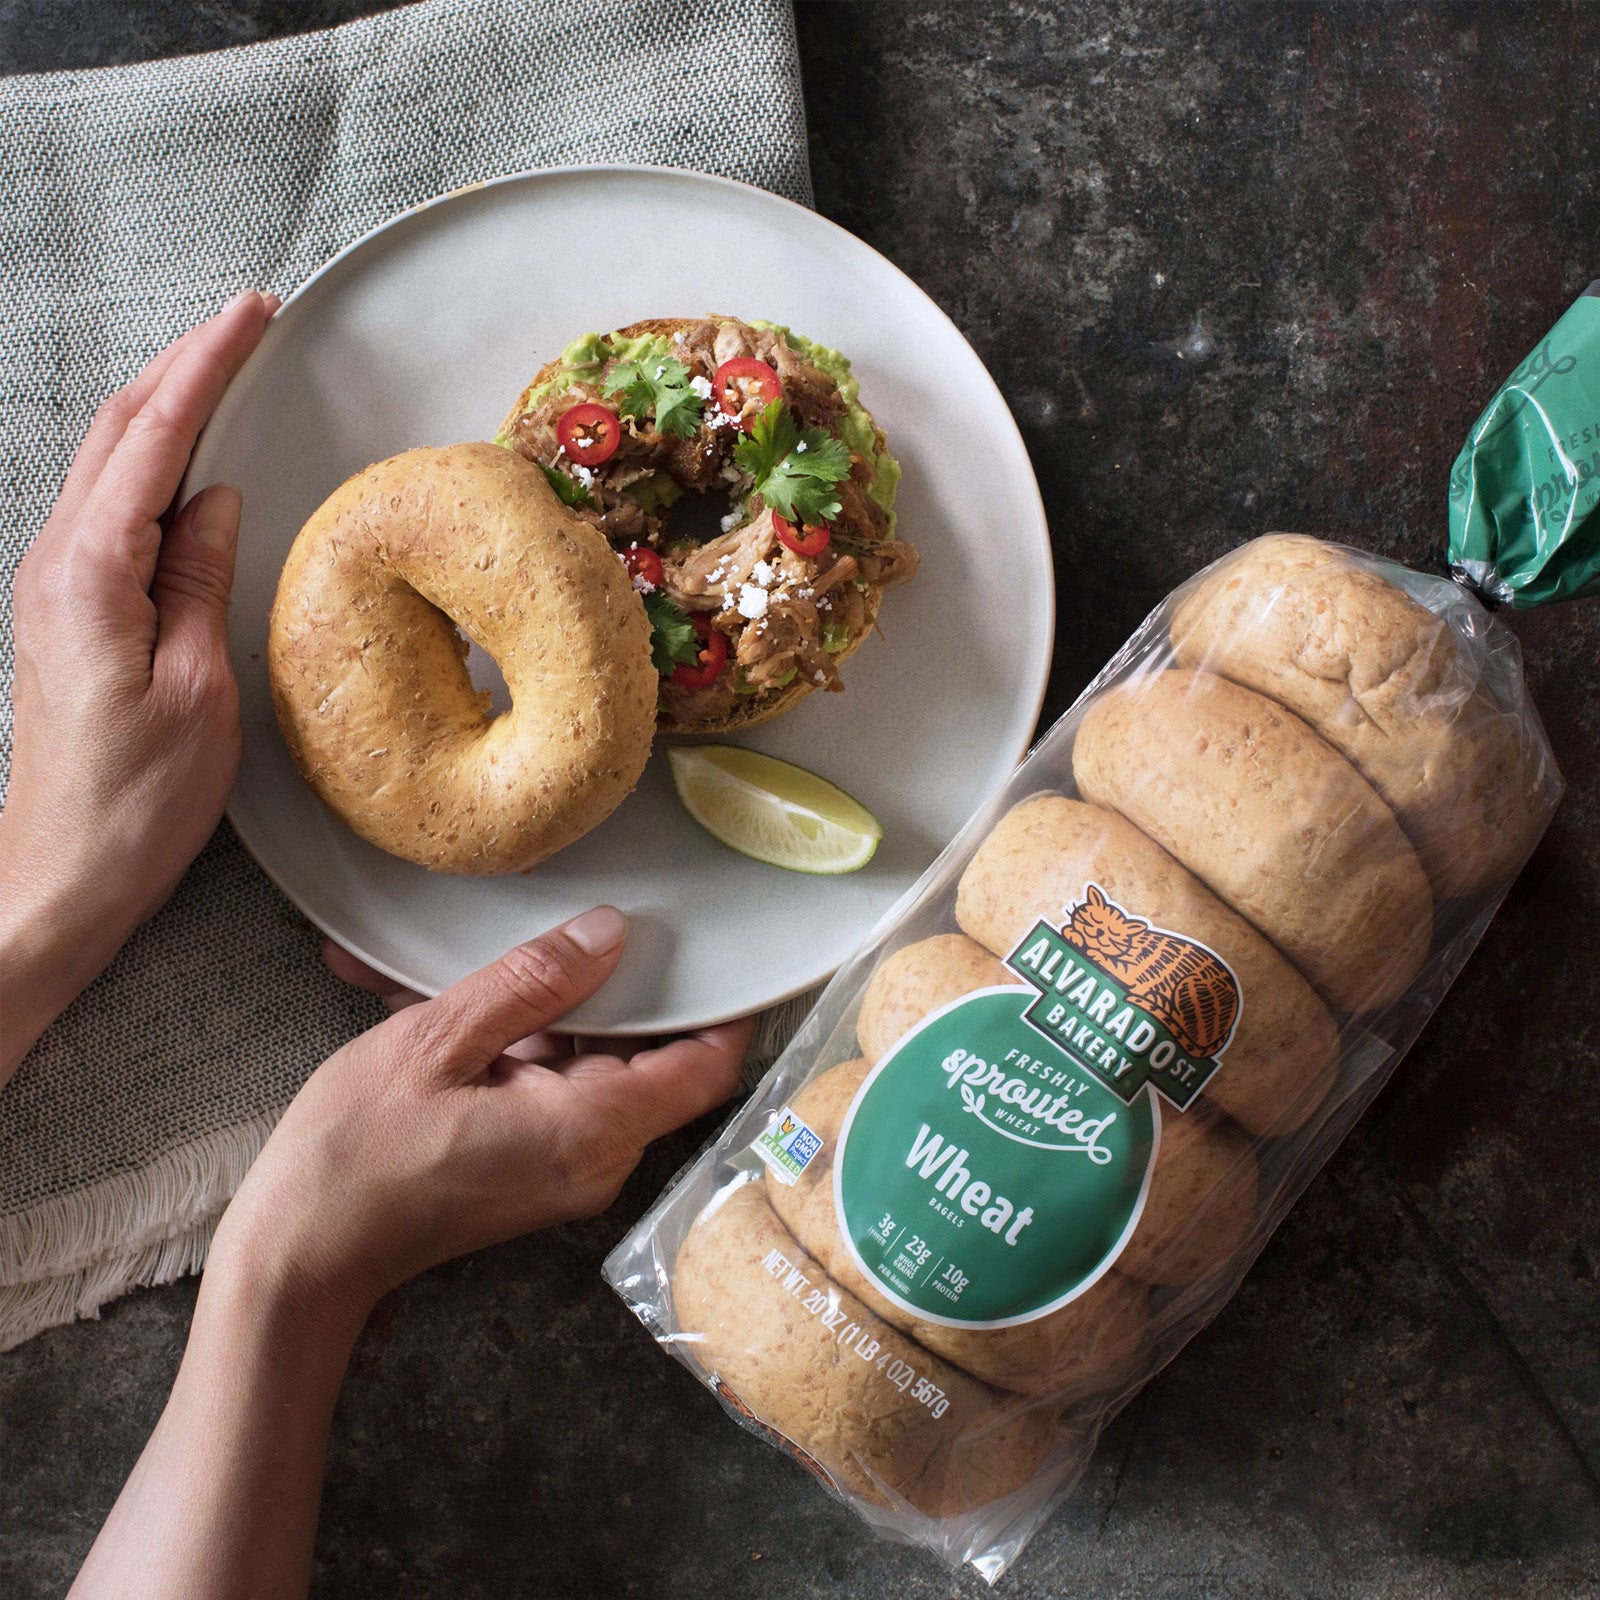 Certified Organic Sprouted Wheat Bagels from California (6pc) - Horizon Farms